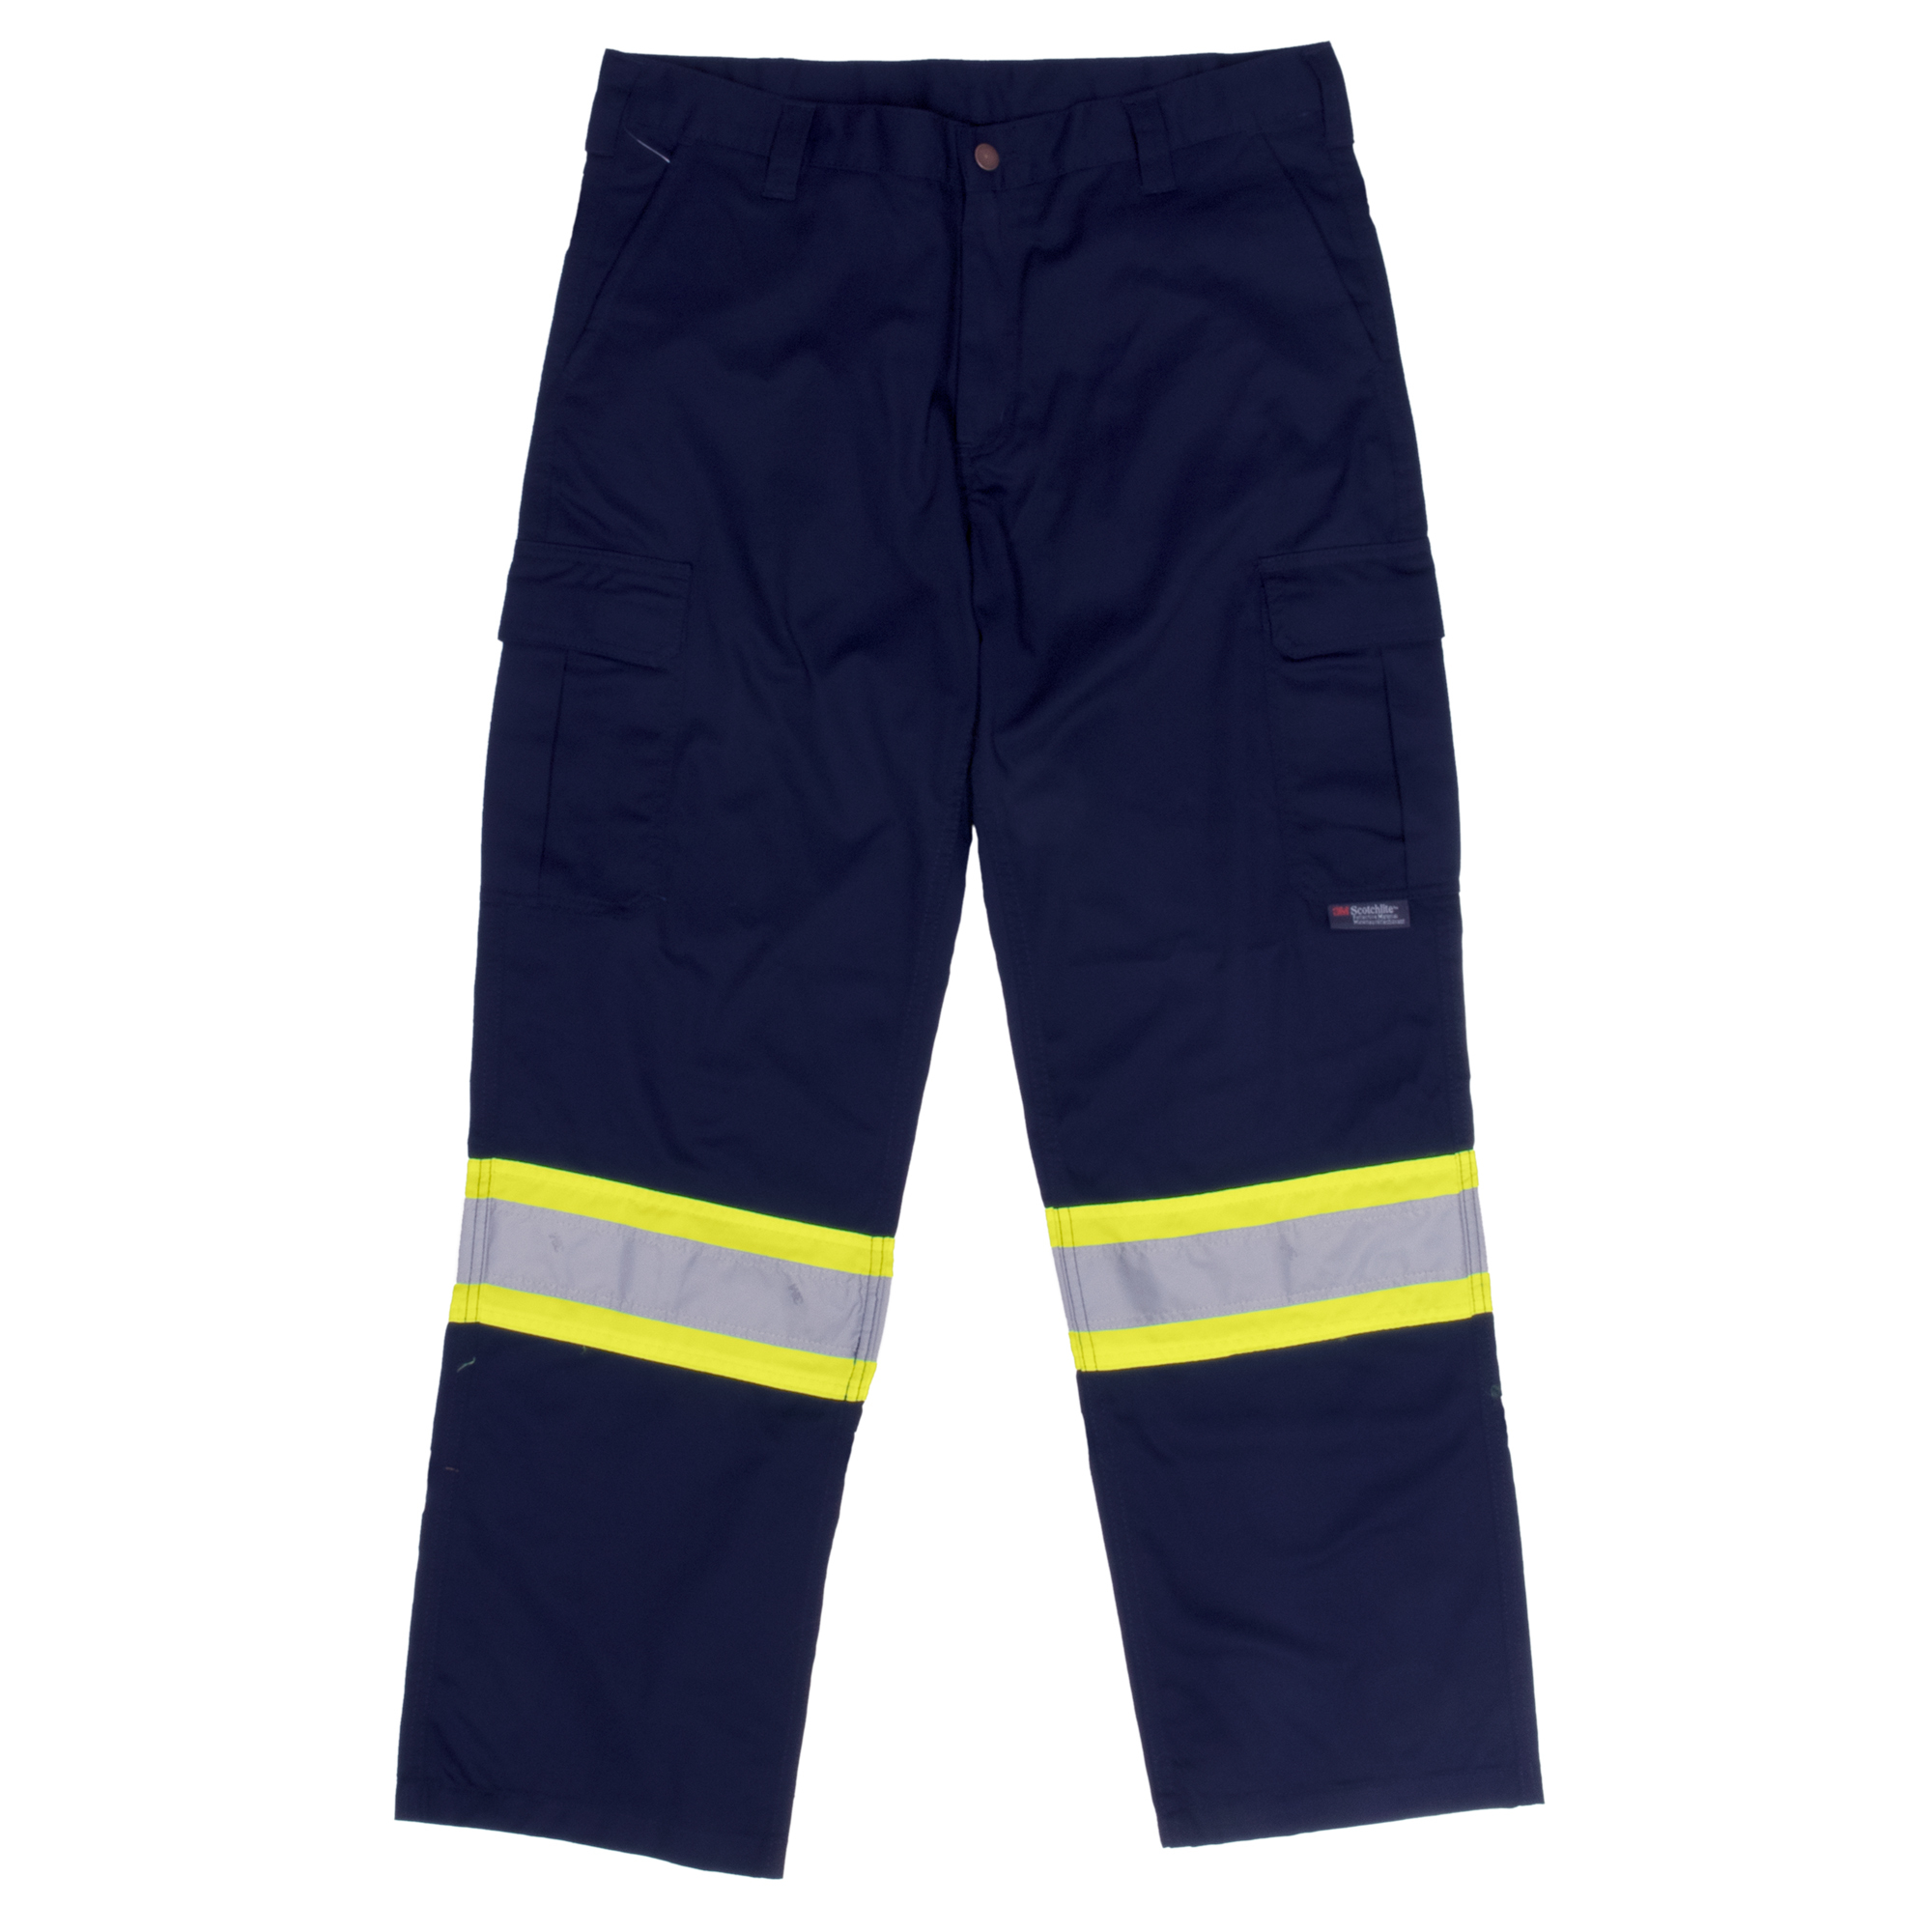 Tough Duck, Safety Cargo Utility Pant, Waist 32 in, Inseam 30 in, Color Navy, Model S60701